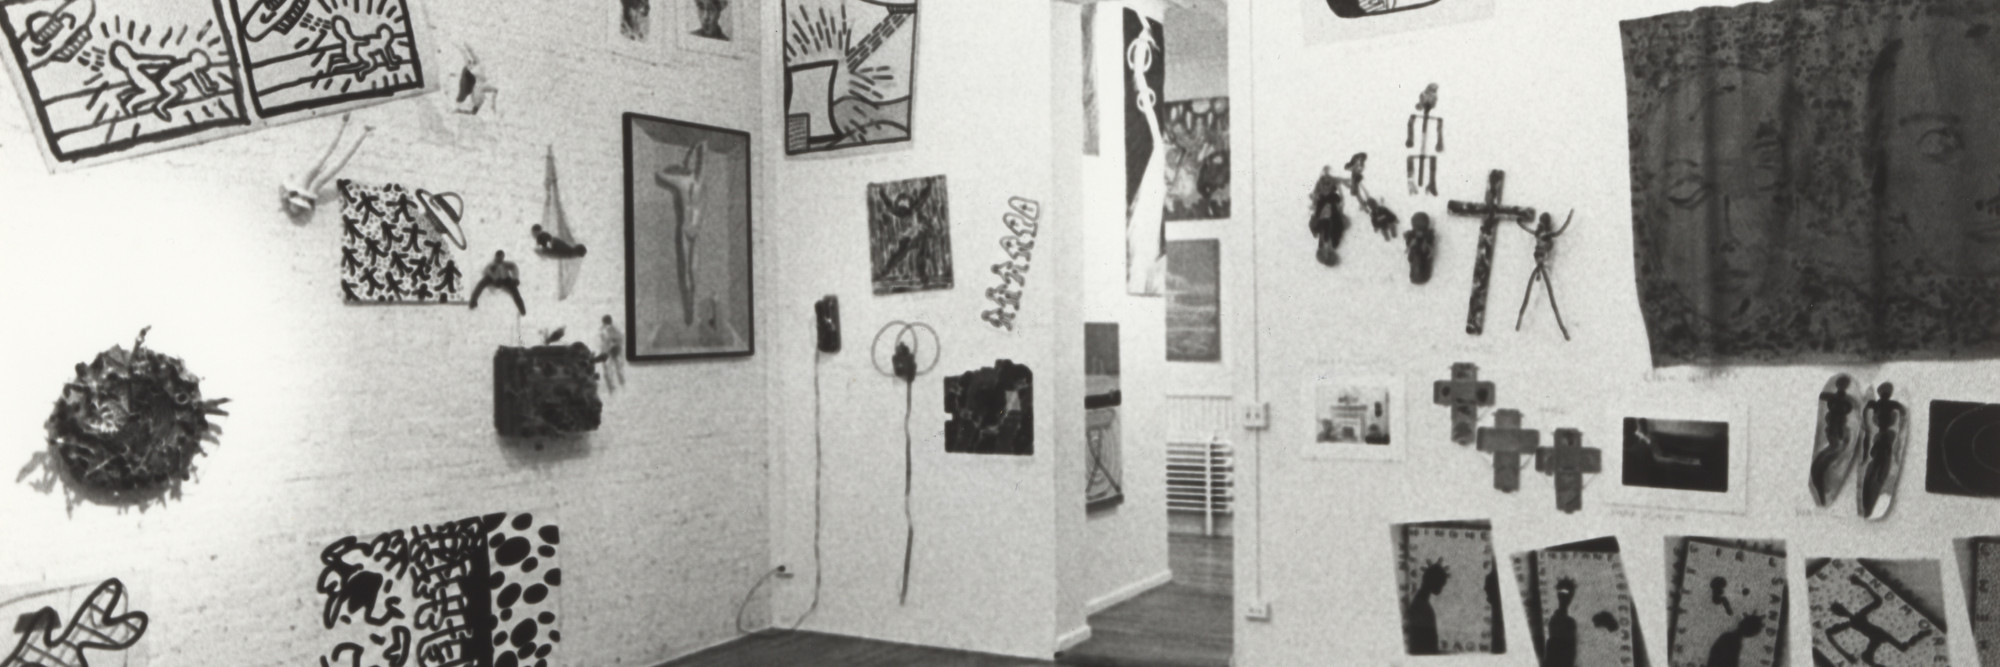 Installation view of the exhibition New York/New Wave, P.S.1 Contemporary Art Center, 1981. MoMA PS1 Archives, III.A.18. The Museum of Modern Art Archives, New York